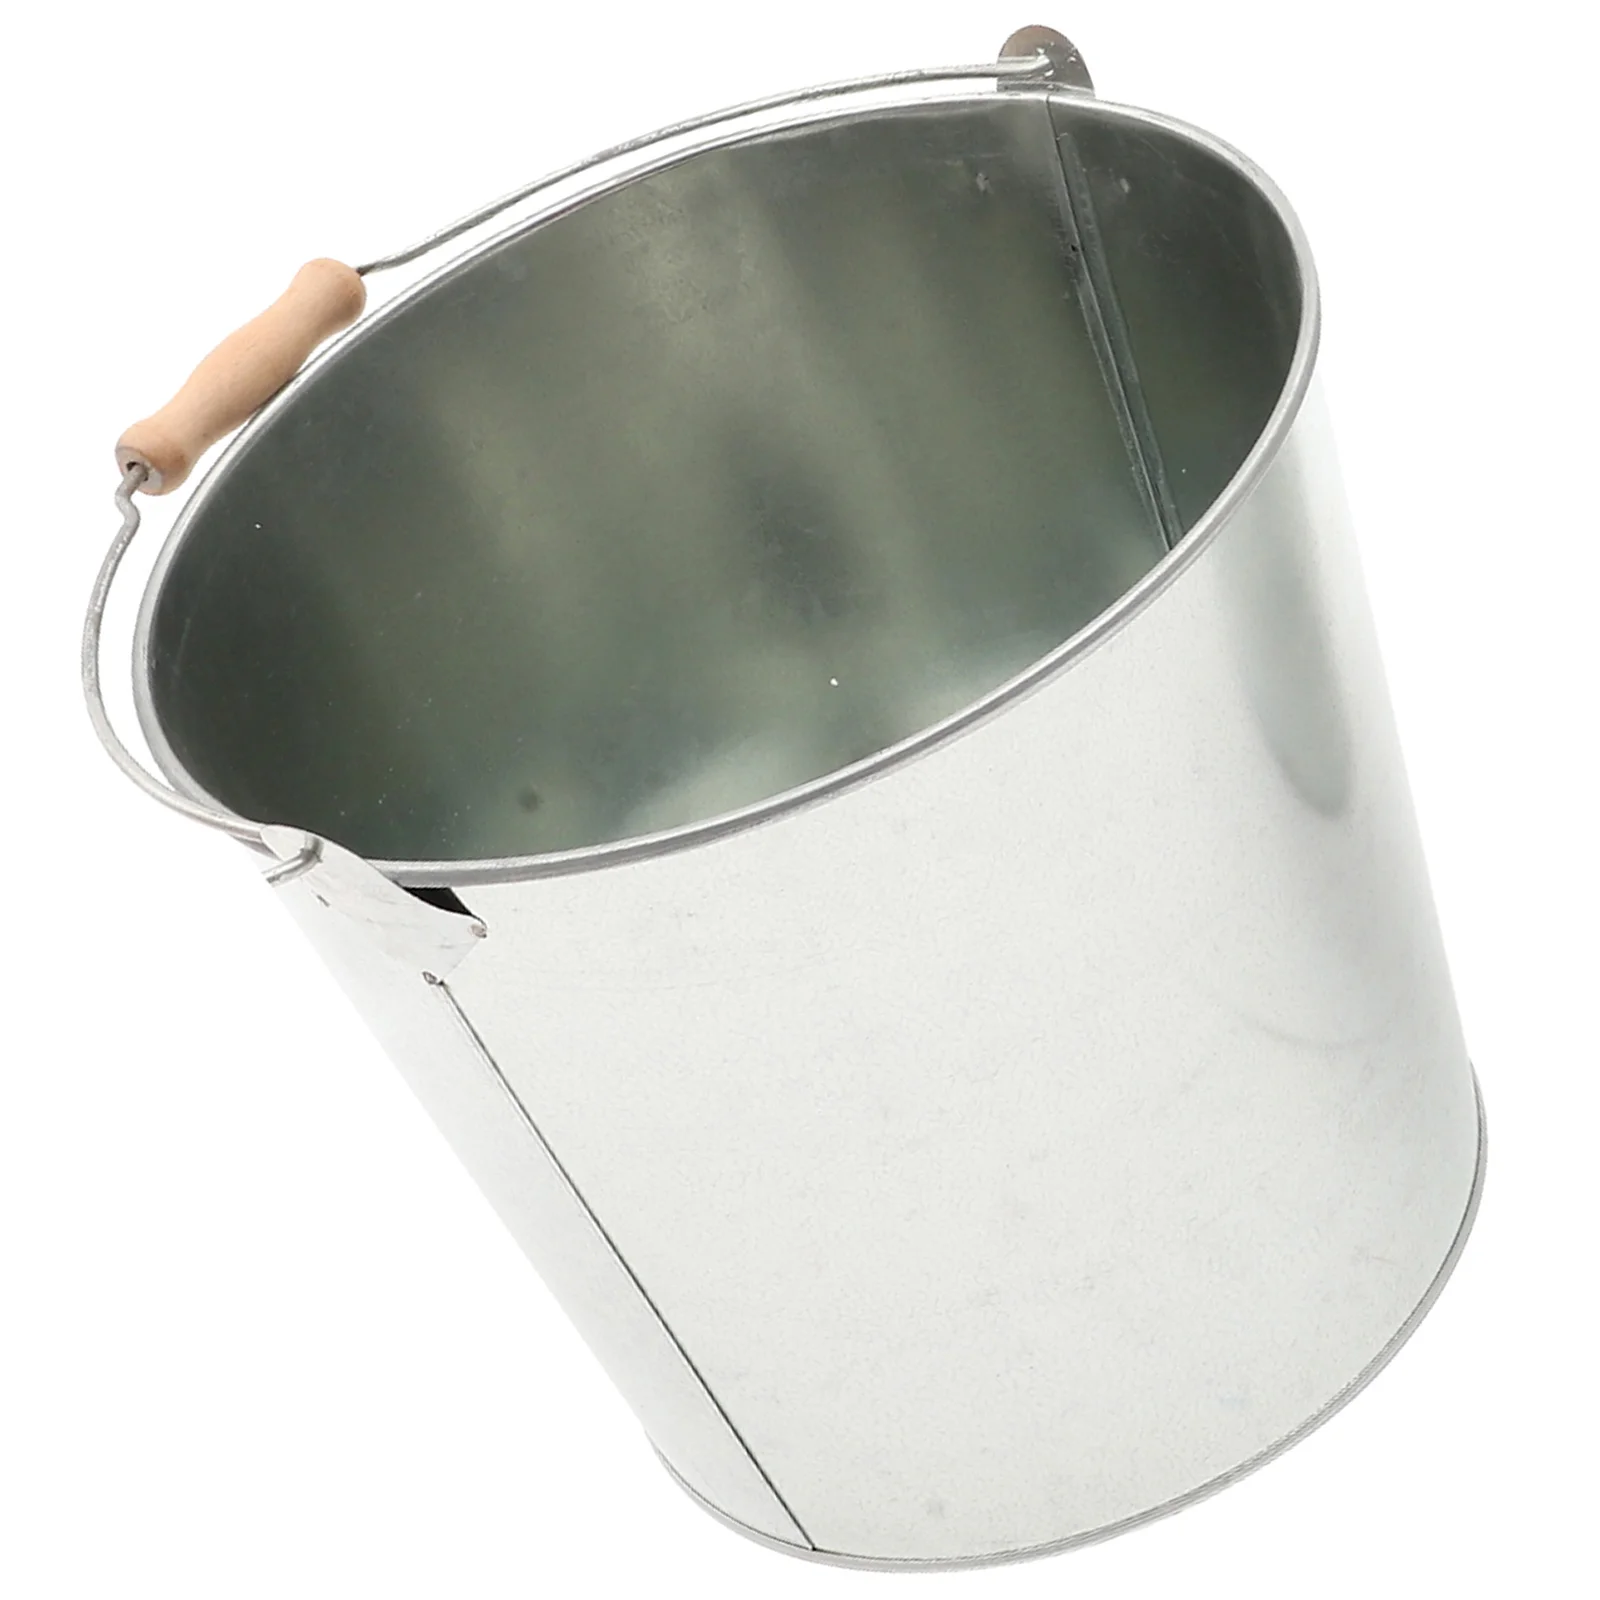 

Metal Fireplace Ash Bucket Outdoor Incinerator Ashtrays Outdoors Home Holder Burn Barrel Tool Coral Container Charcoal box